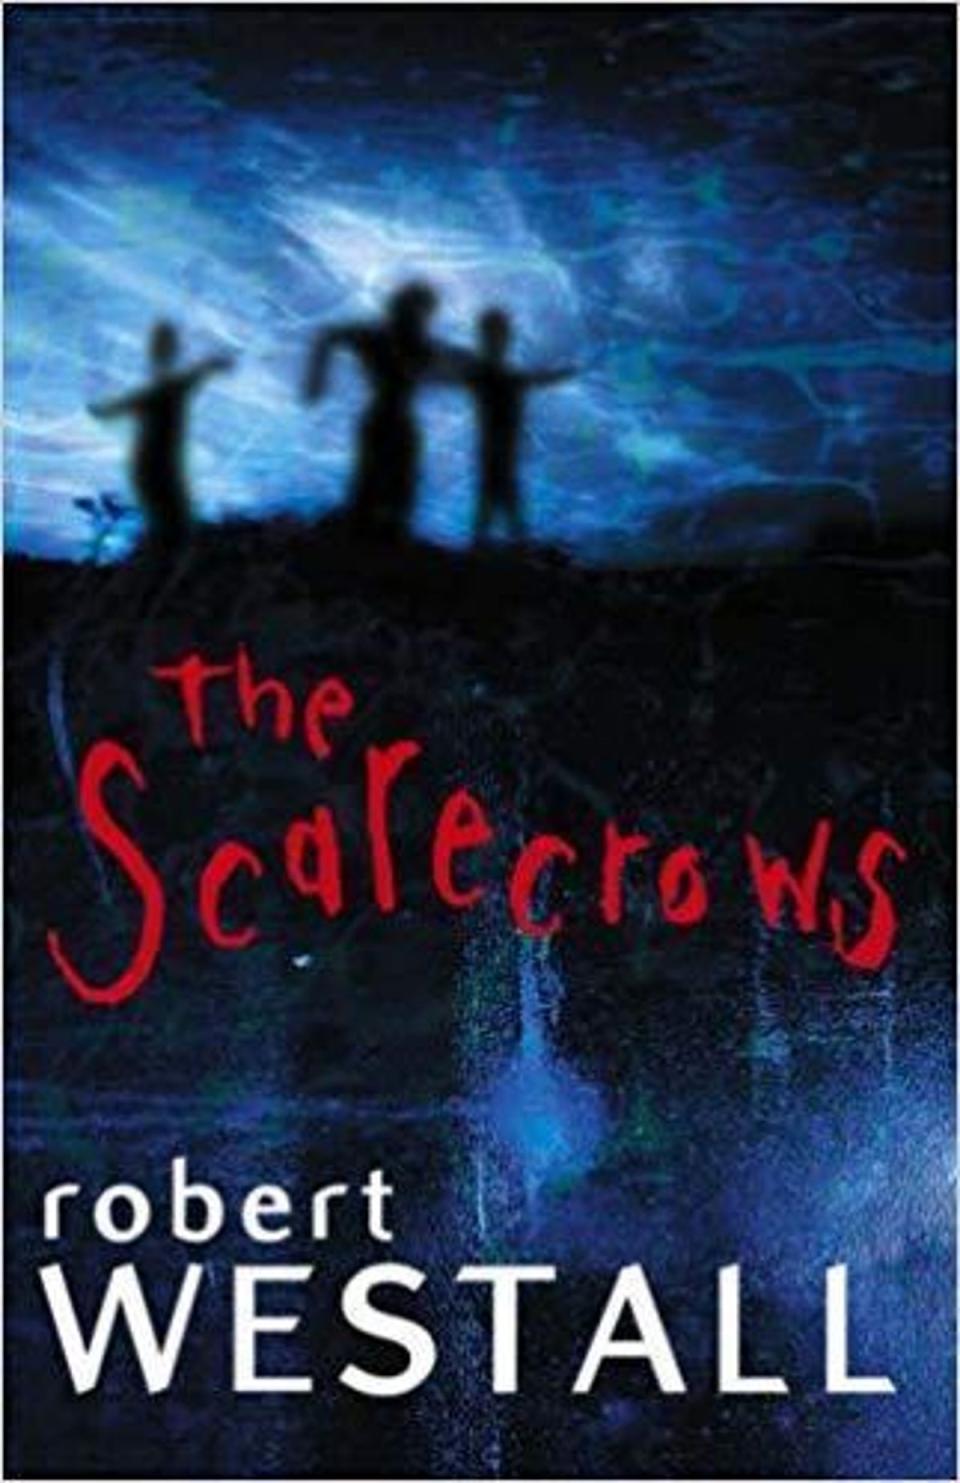 22. The Scarecrows by Robert Westall (1981): 